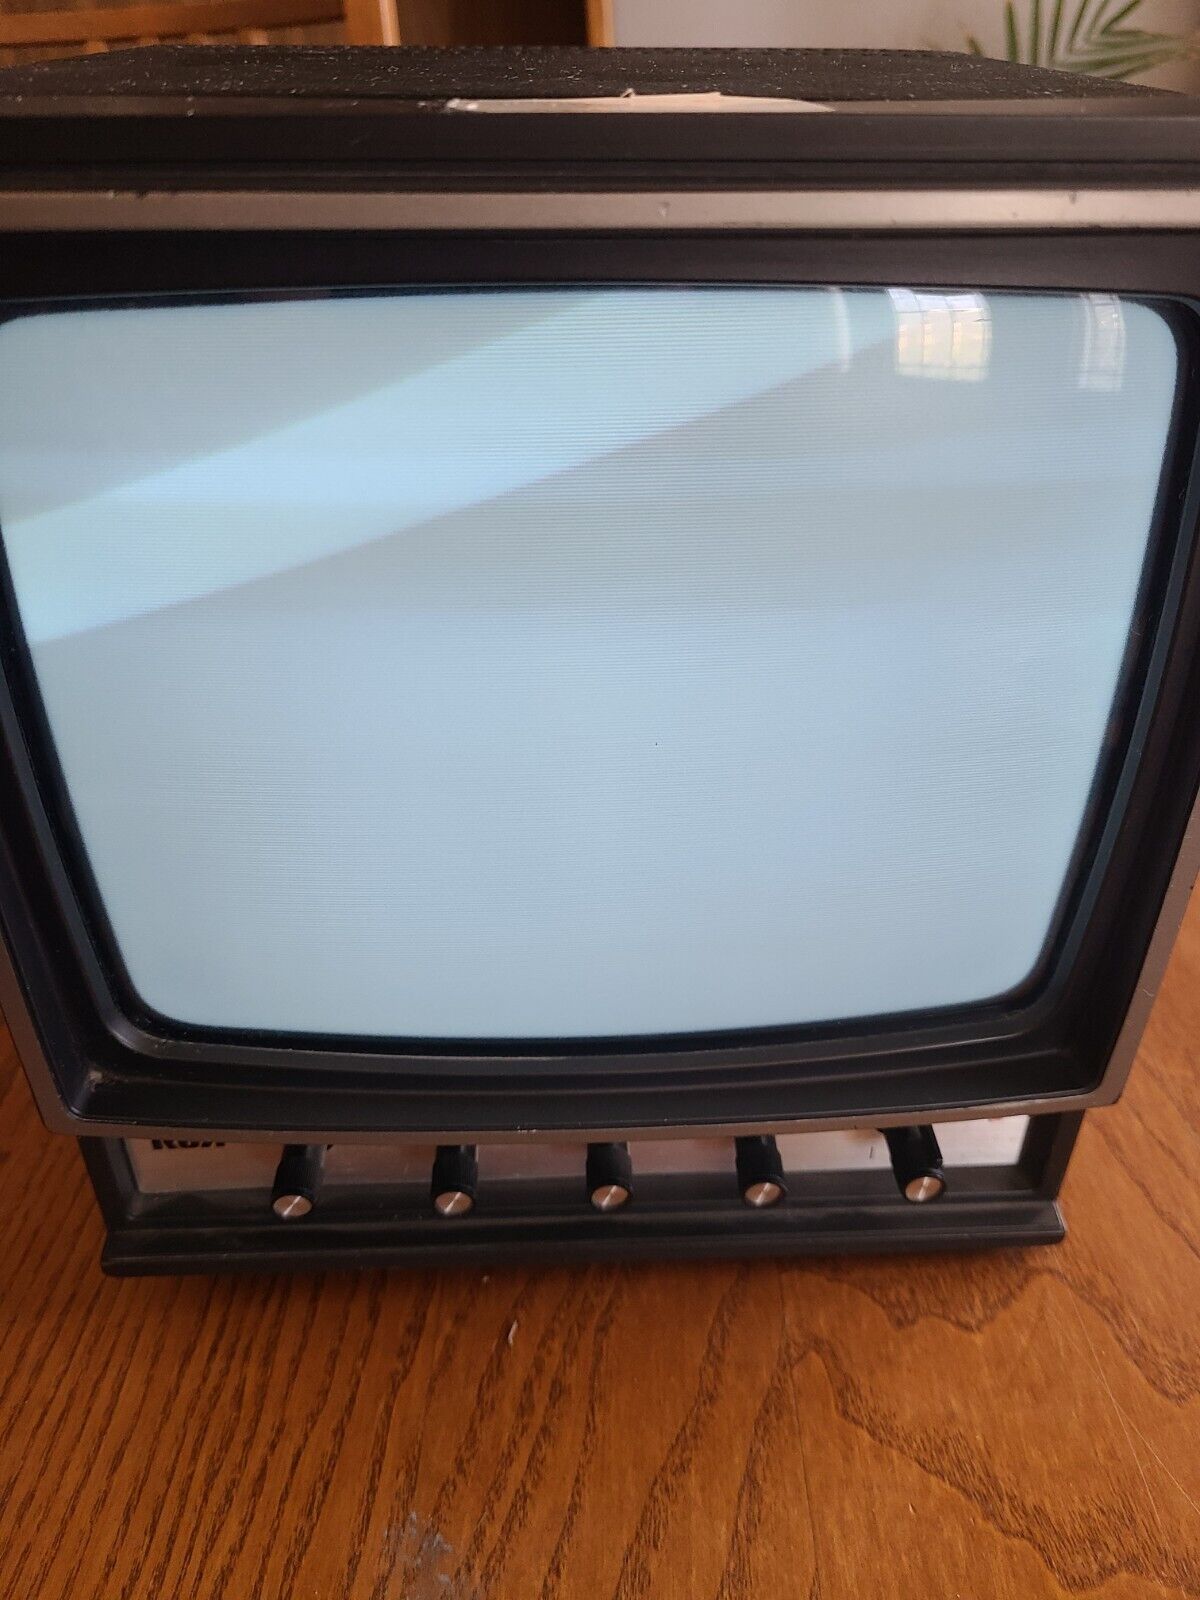 RCA TC1109 Monitor, Vintage working, see pictures